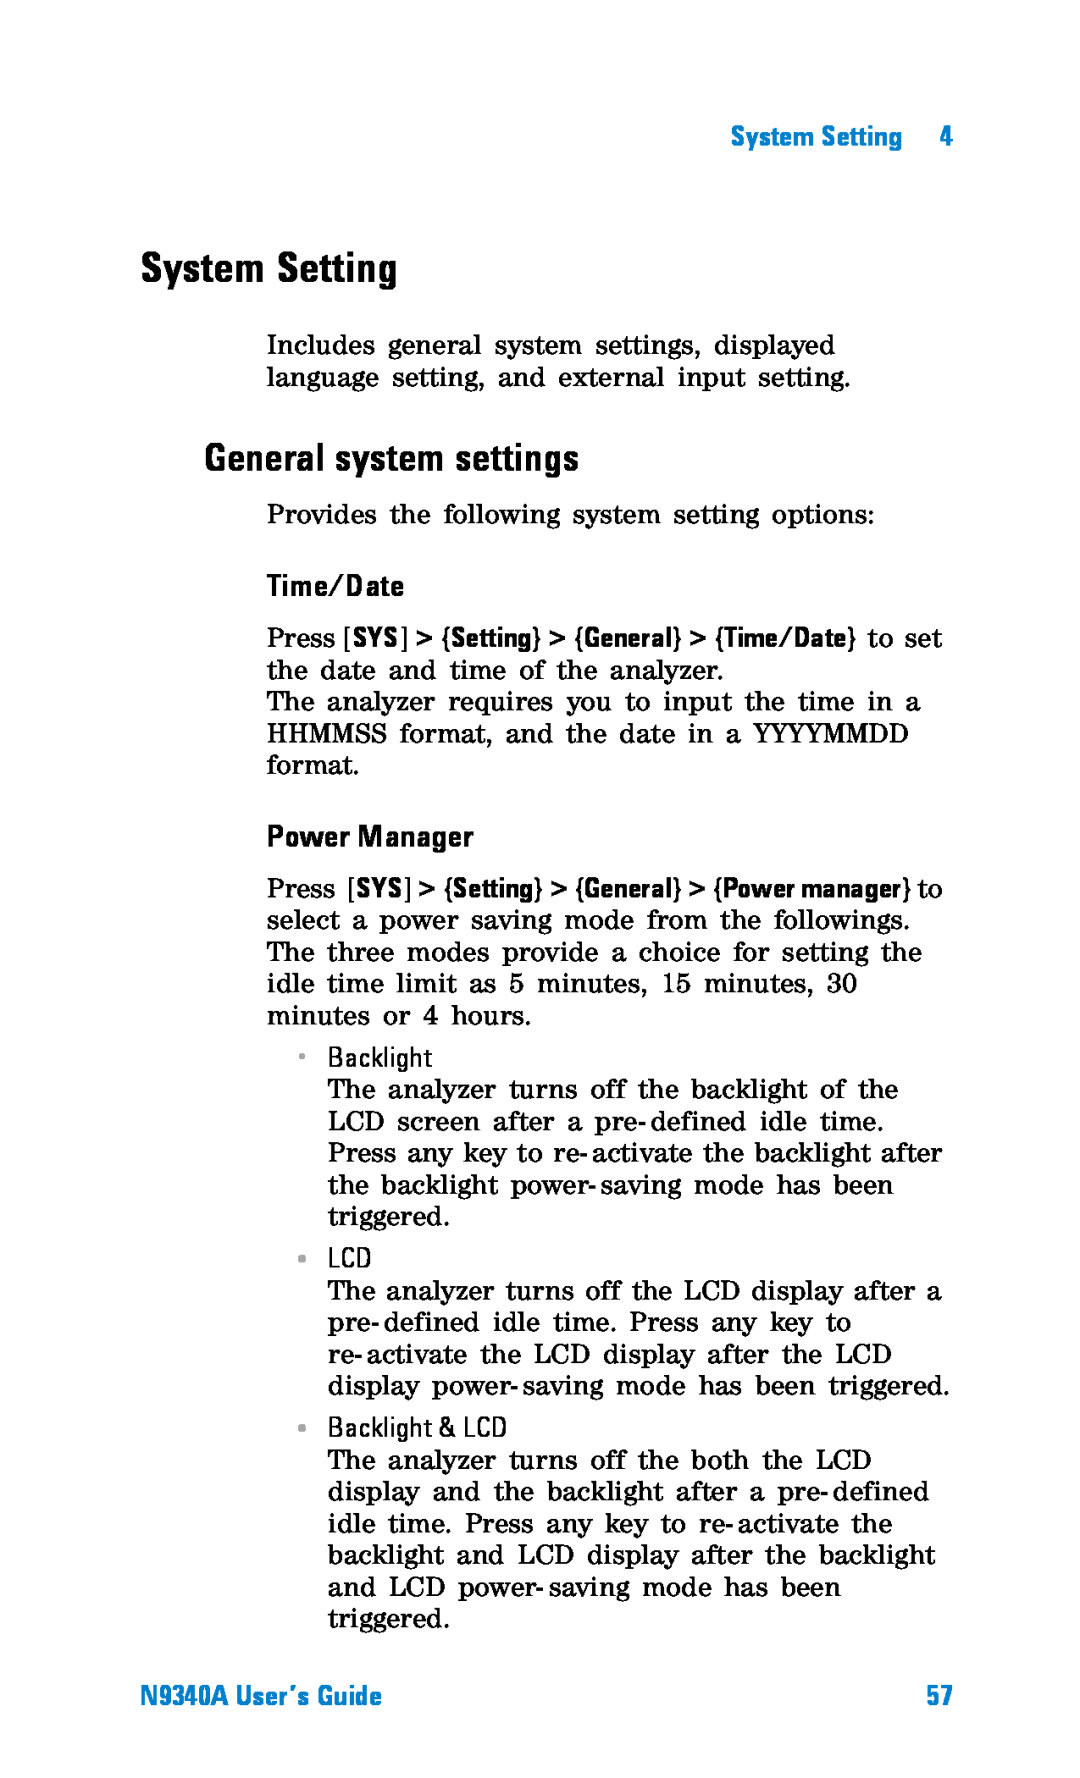 Agilent Technologies manual System Setting, General system settings, Time/Date, Power Manager, N9340A User’s Guide 